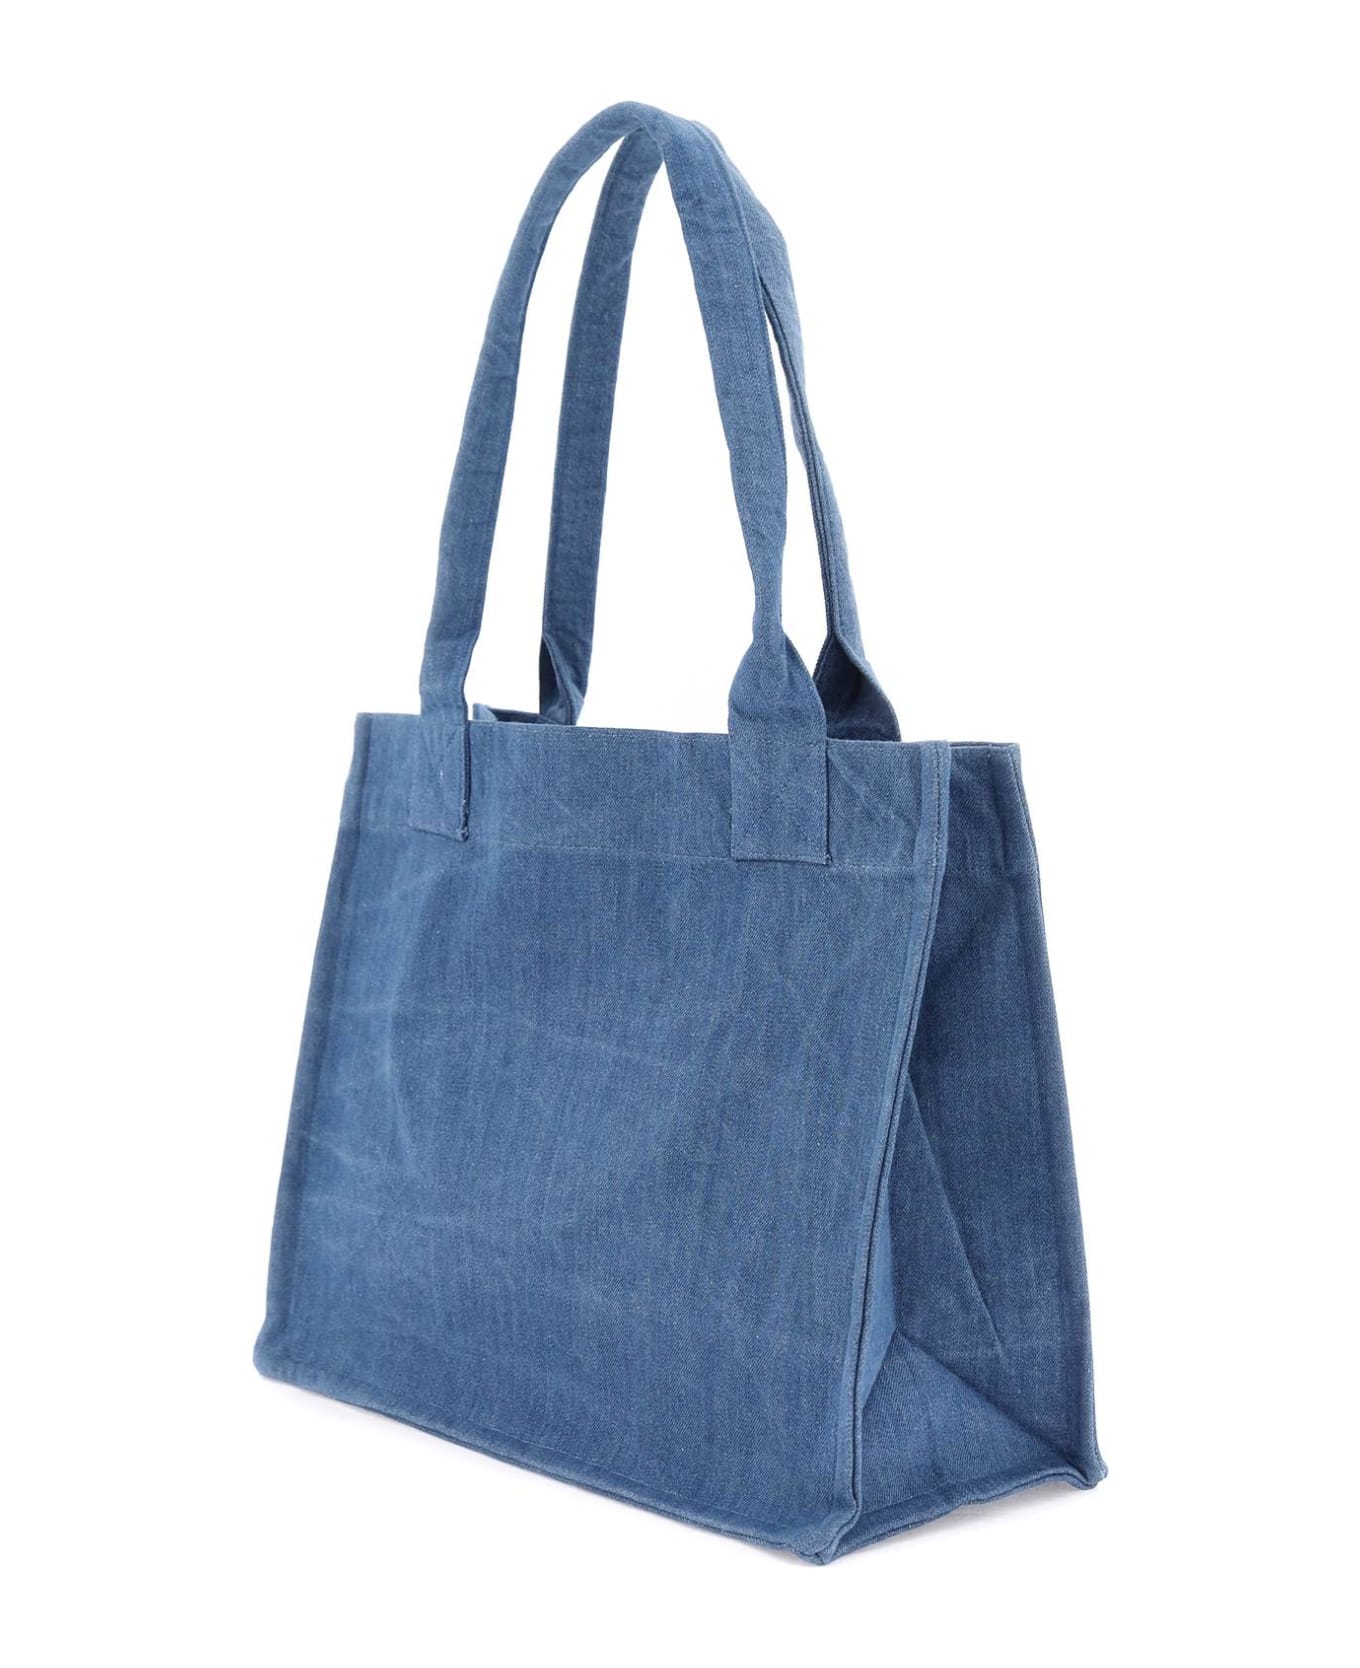 Ganni Tote Bag With Embroidery - DENIM (Blue)